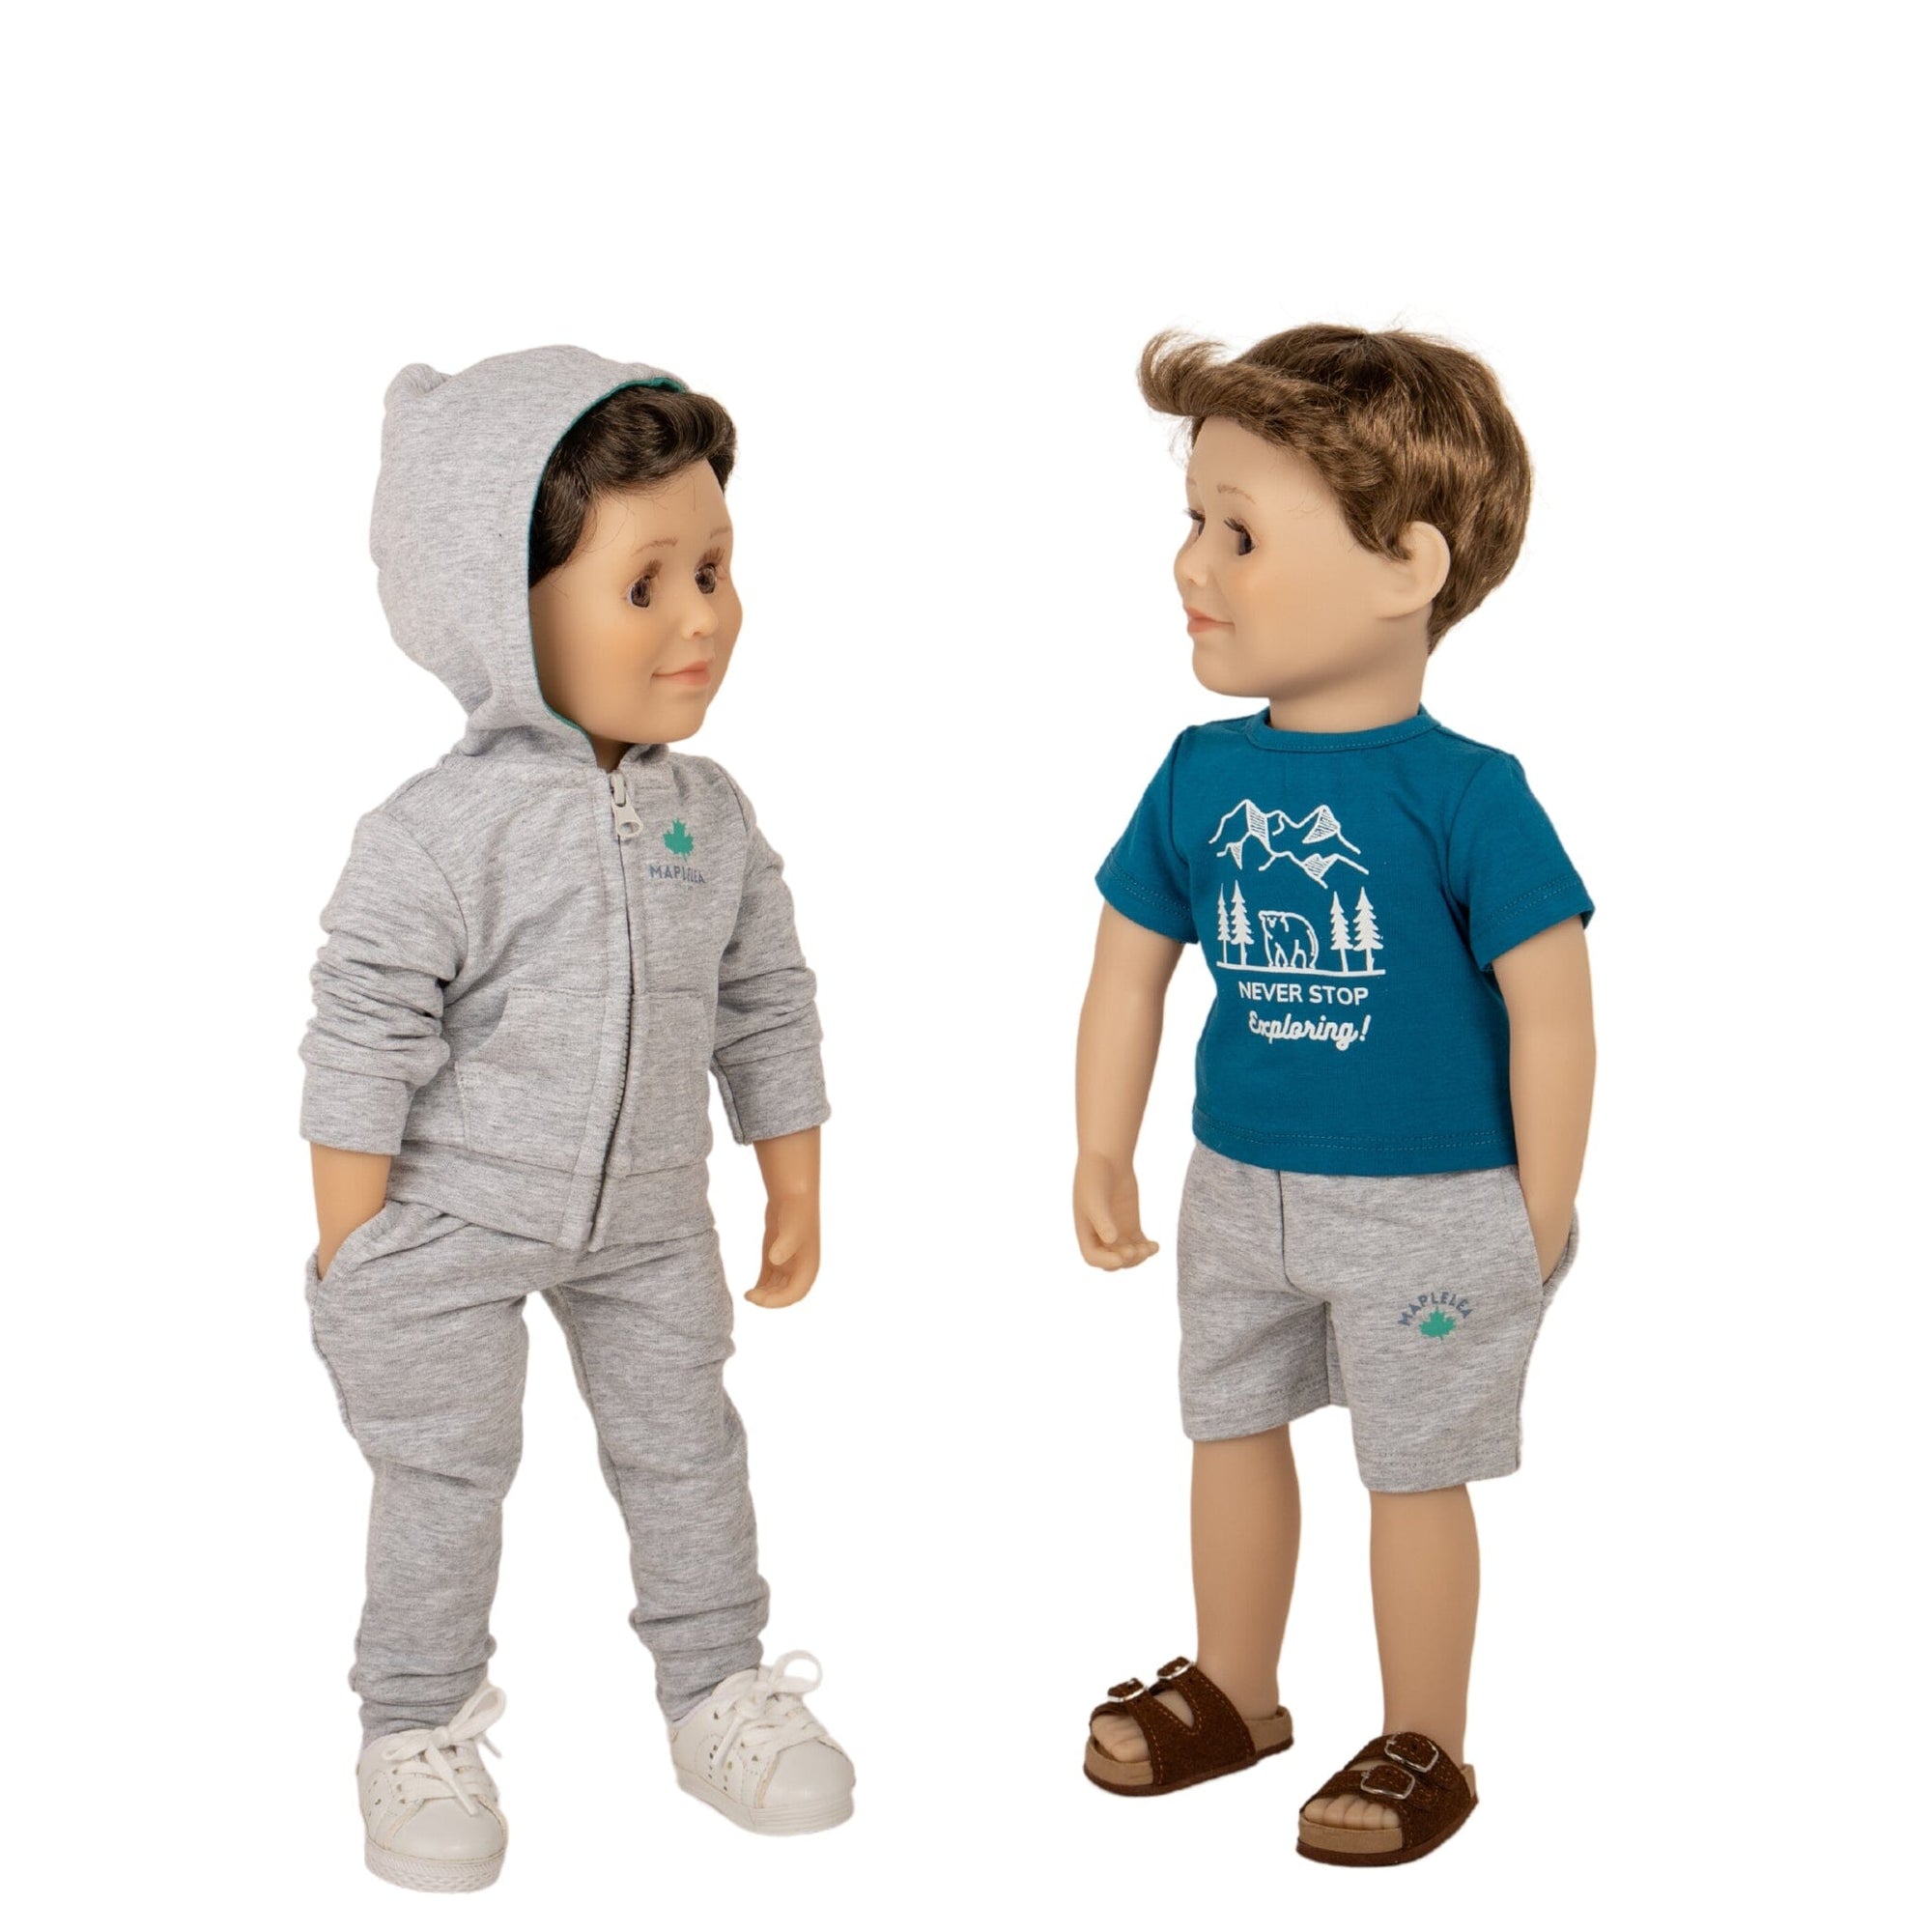 18" boy dolls in camping hoodie sweatpants and runners and graphic t-shirt and shorts with sandals